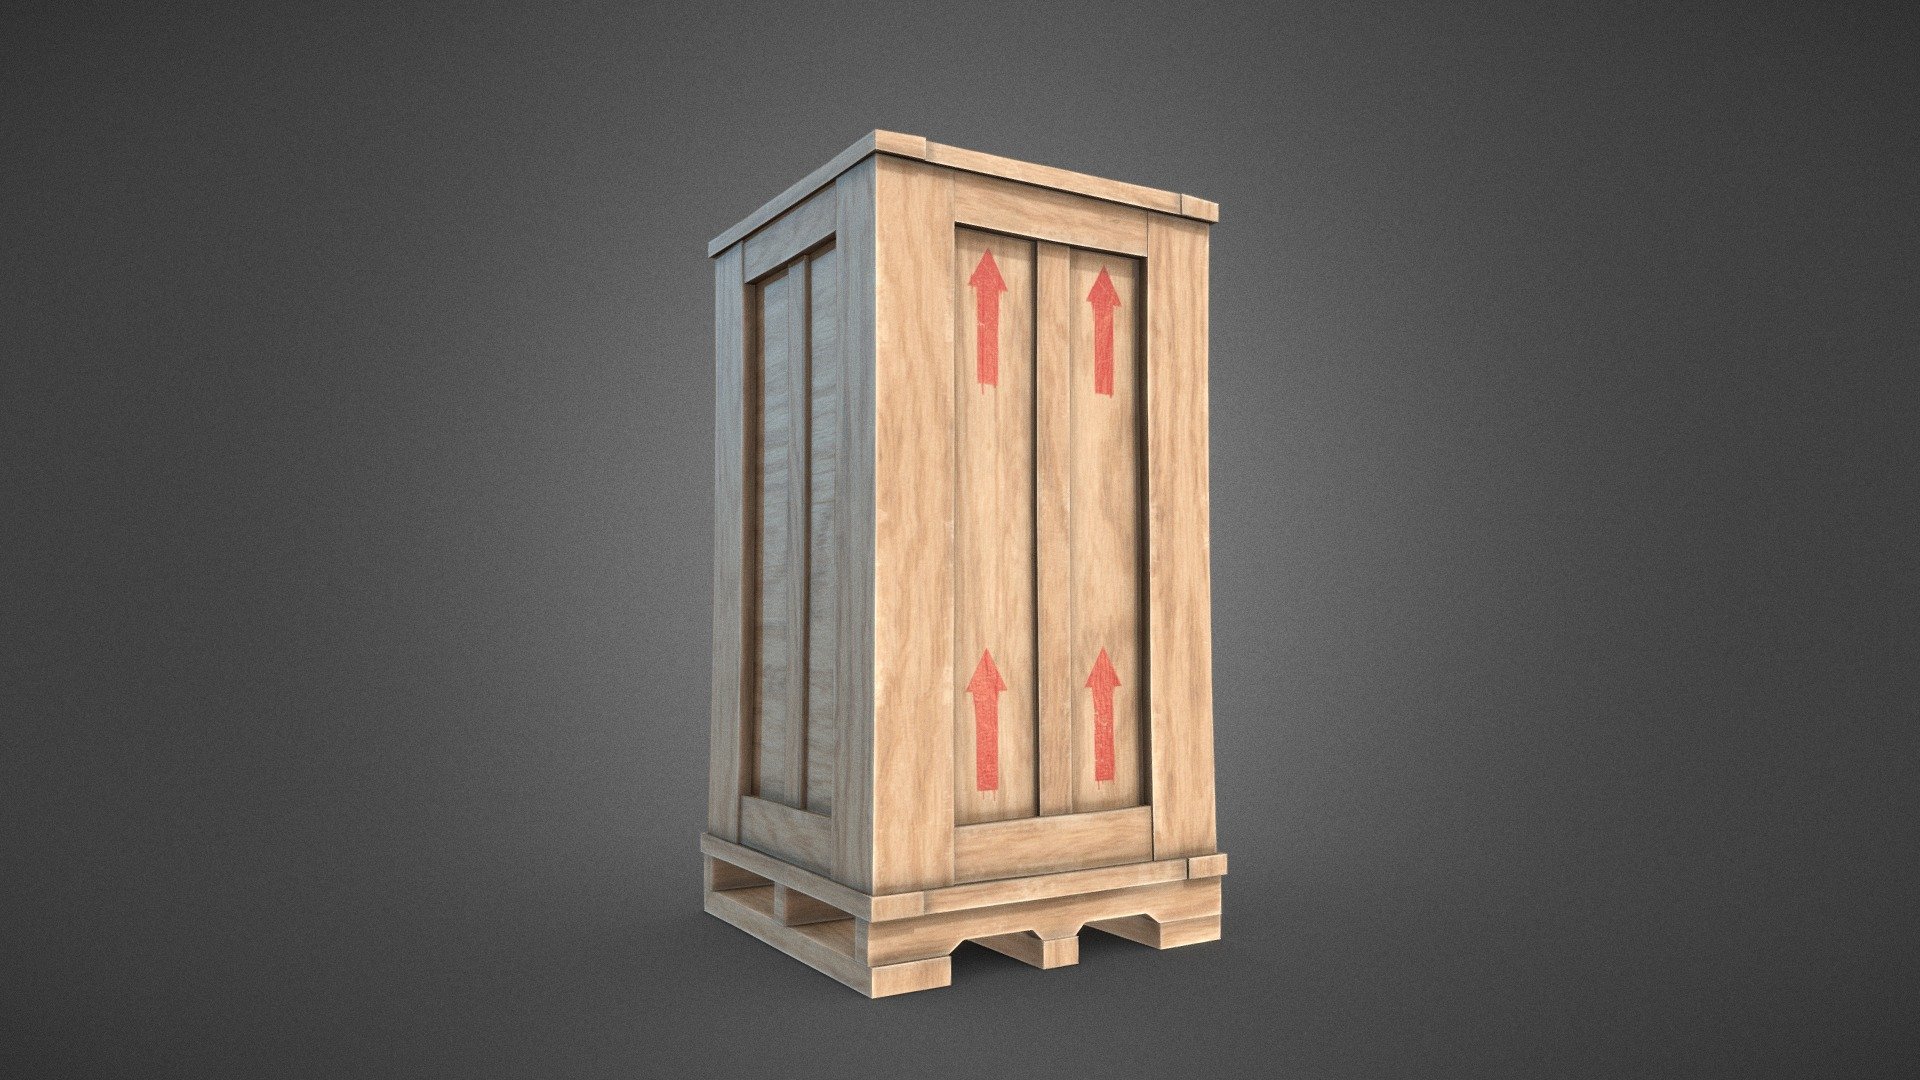 Stylised 3D models of a large wooden box.

3D Models:

Formats included : .FBX .OBJ (highpoly model)

Textures:

Created with Substance Painter.

1*4K 8-bit PNG format.

PBR Metal/Roughness standard 3d model